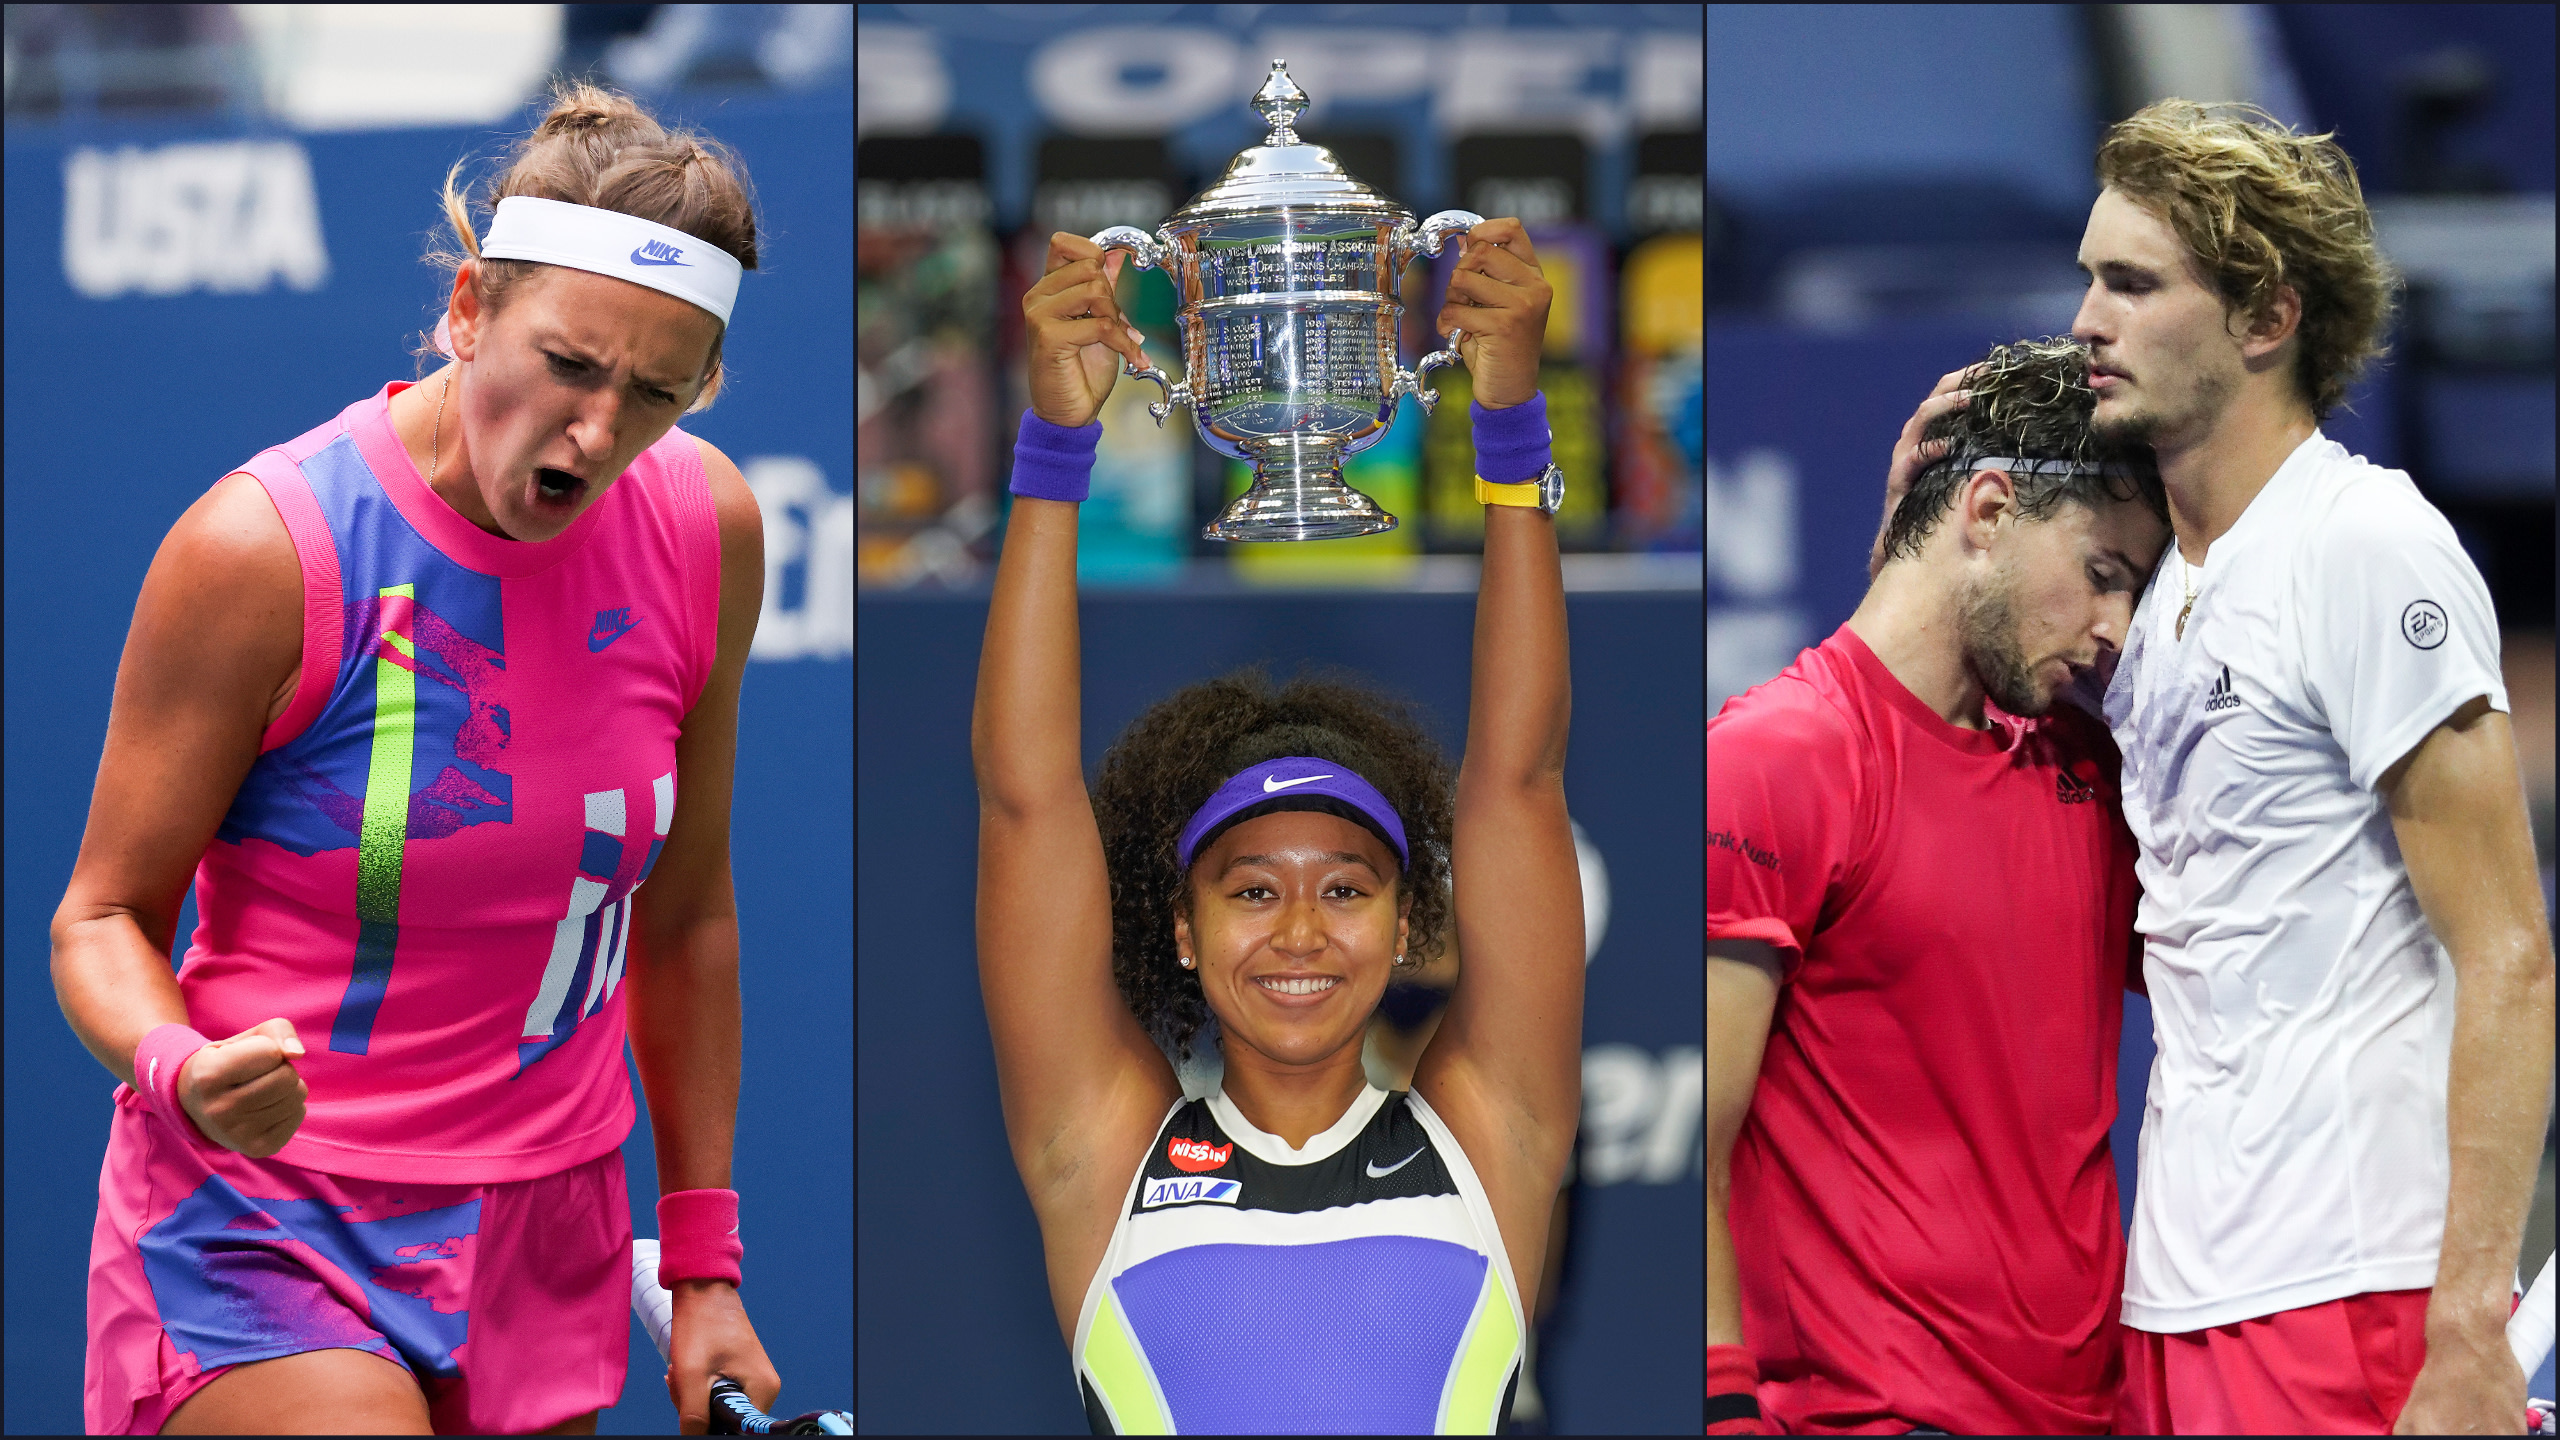 2020 US Open speaks to tennis' greatness and ability of its athletes